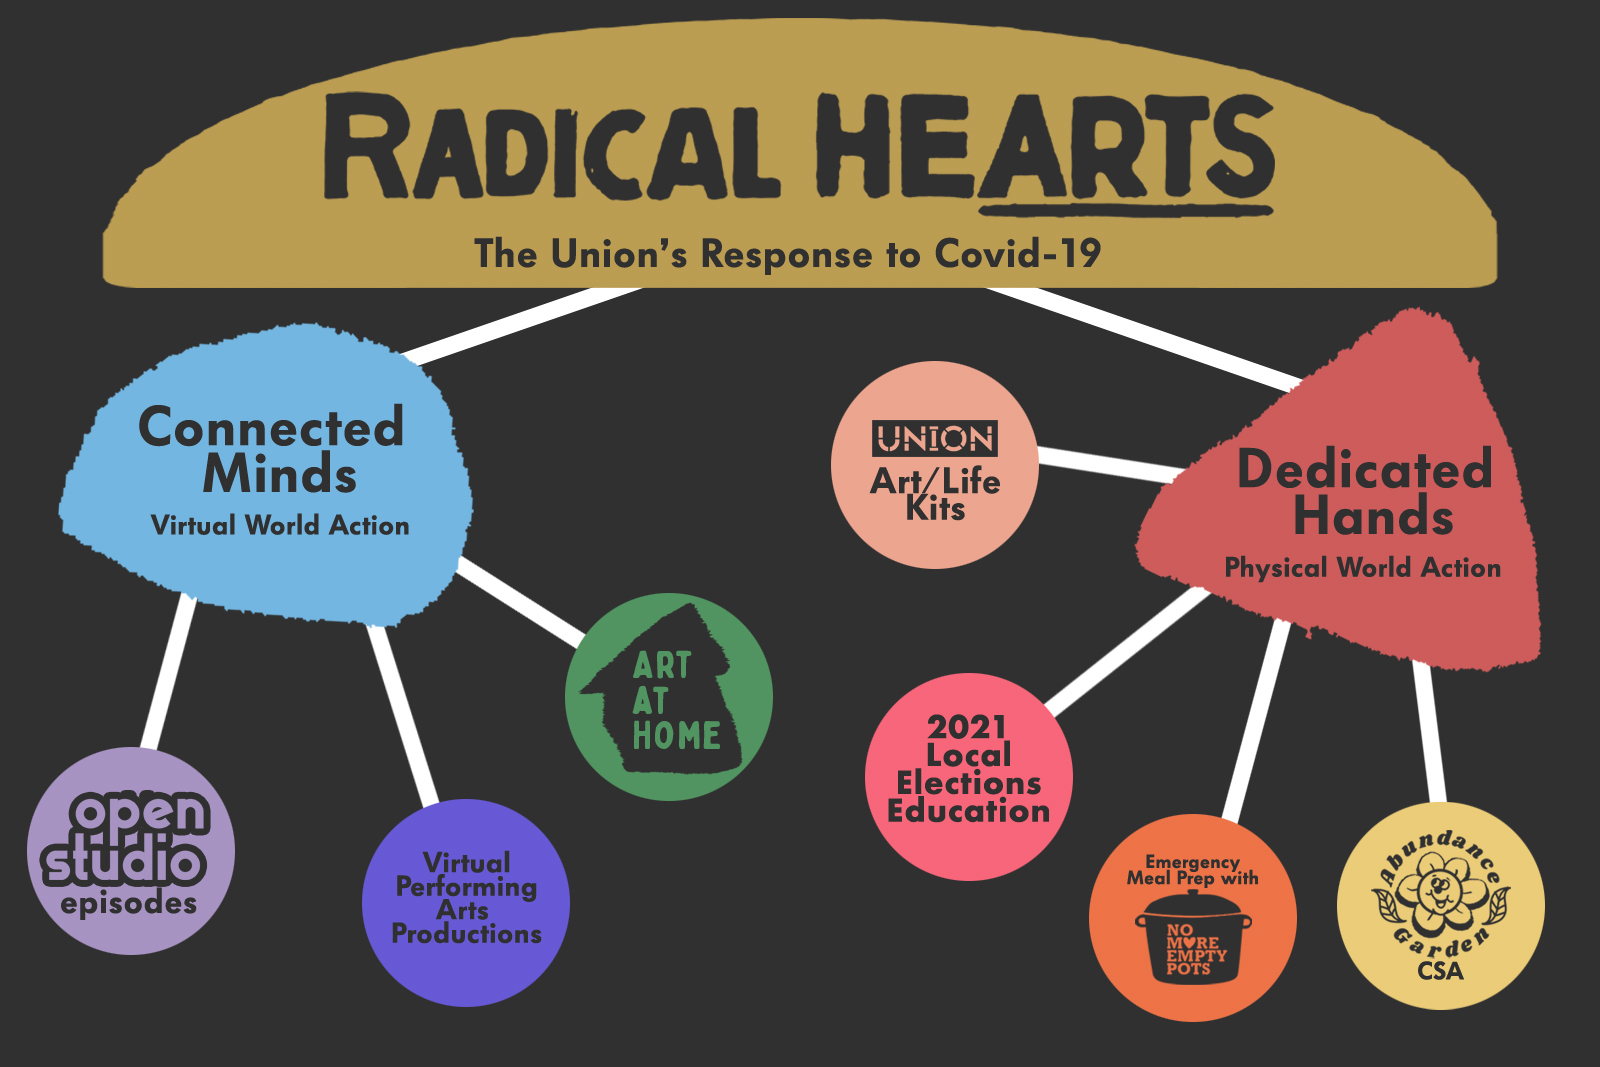 Radical hearts programming chart. Several shapes with program titles inside, connected by lines. Under the connected minds heading: Open Studio; Art at Home; Virtual Performing Arts. Dedicated Hands: Art/Life Kits; Abundance Garden CSA